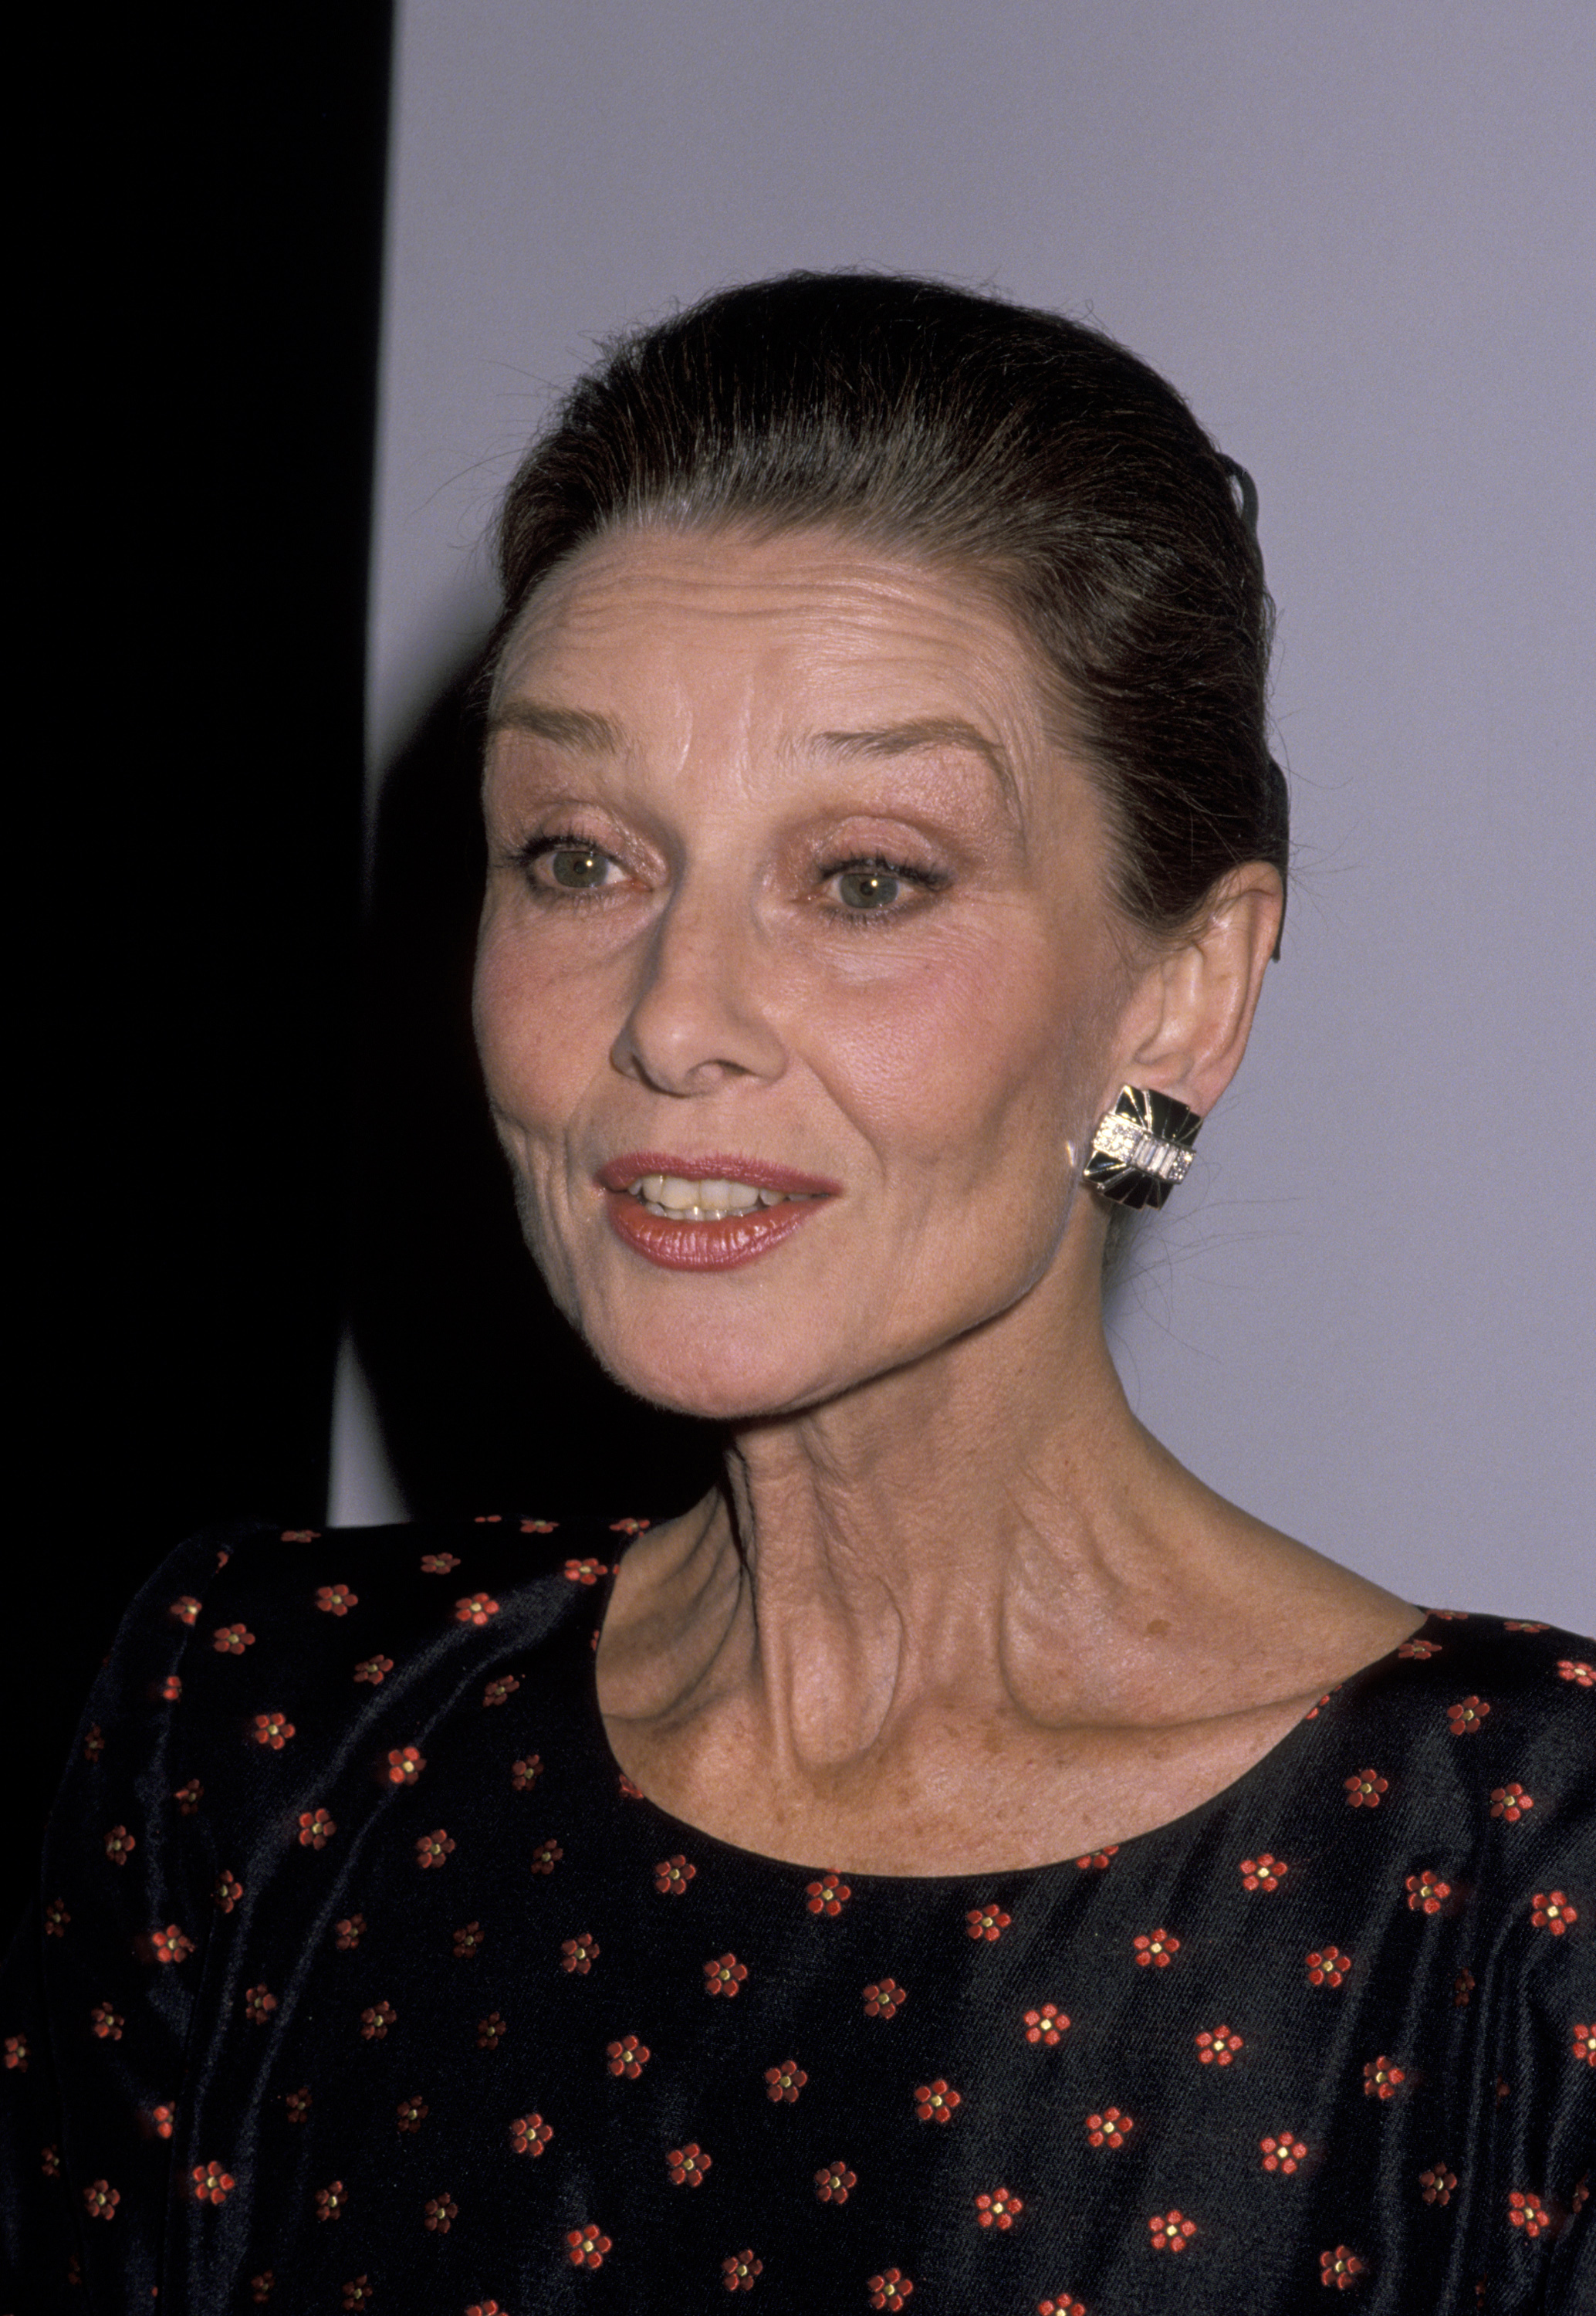 Audrey Hepburn at the 17th Annual International Emmy Awards, on November 20, 1989. | Source: Getty Images